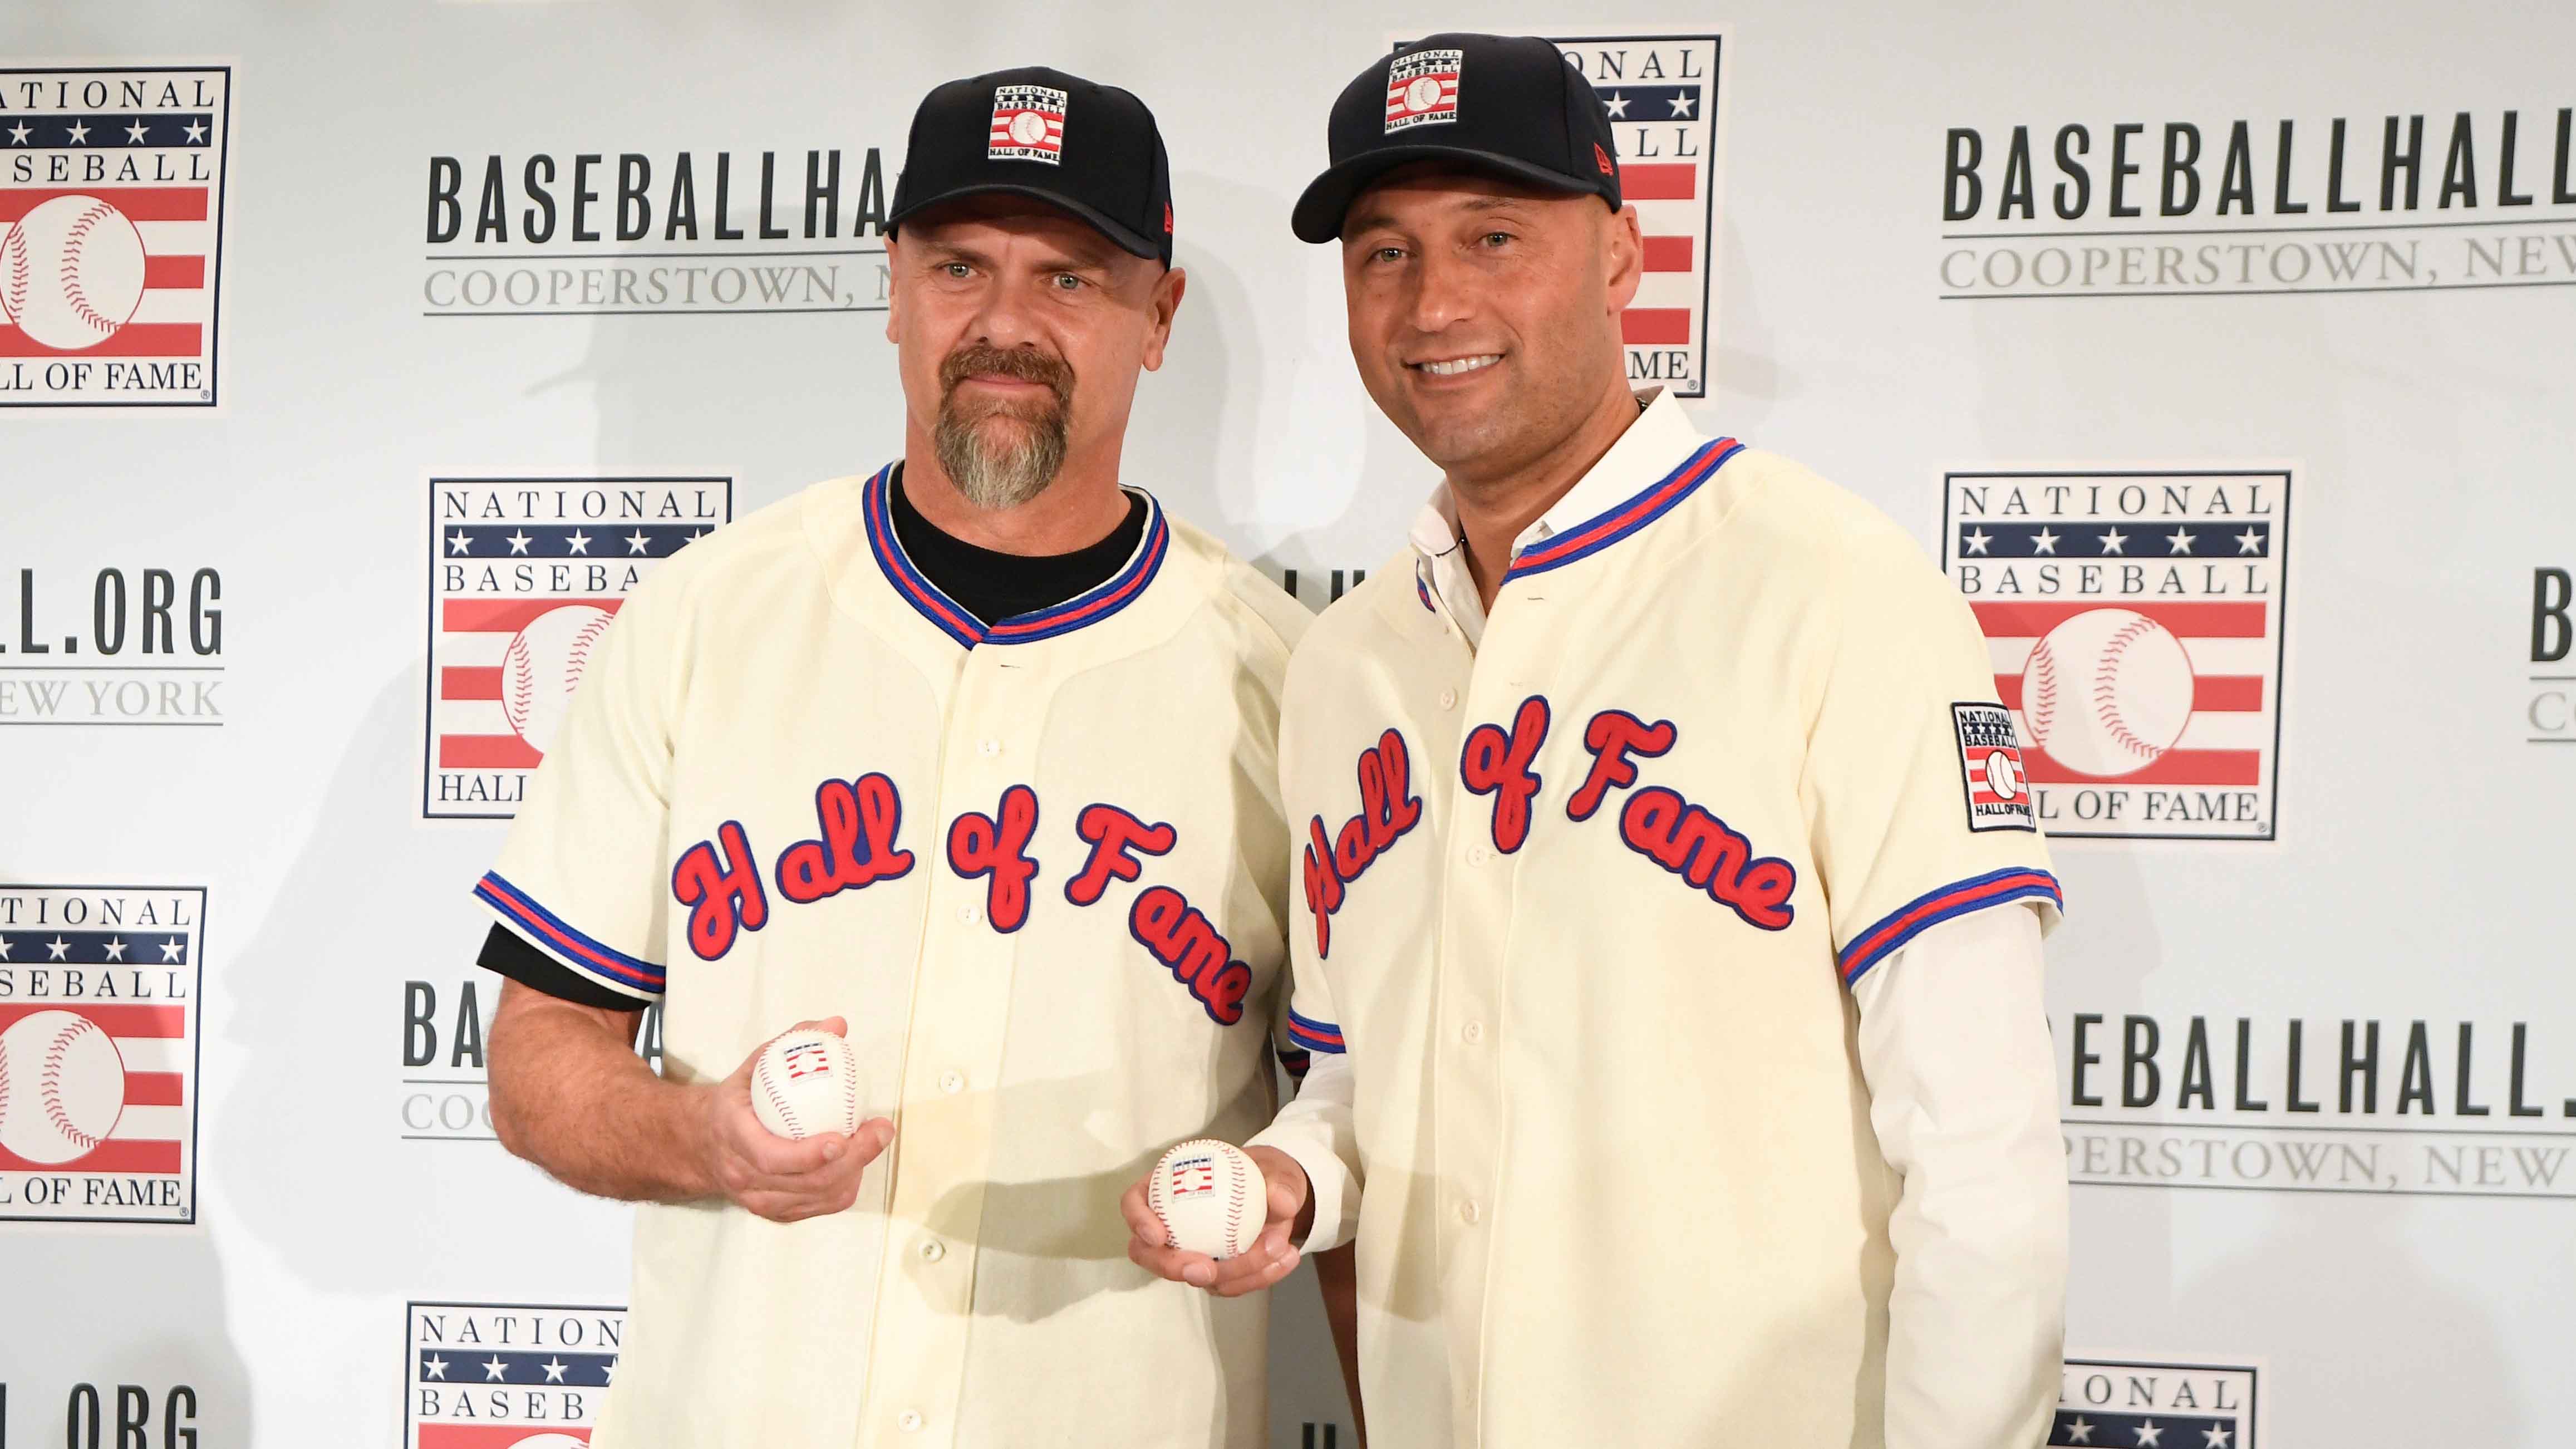 Derek Jeter and Larry Walker are set to become the newest members of the Hall of Fame.